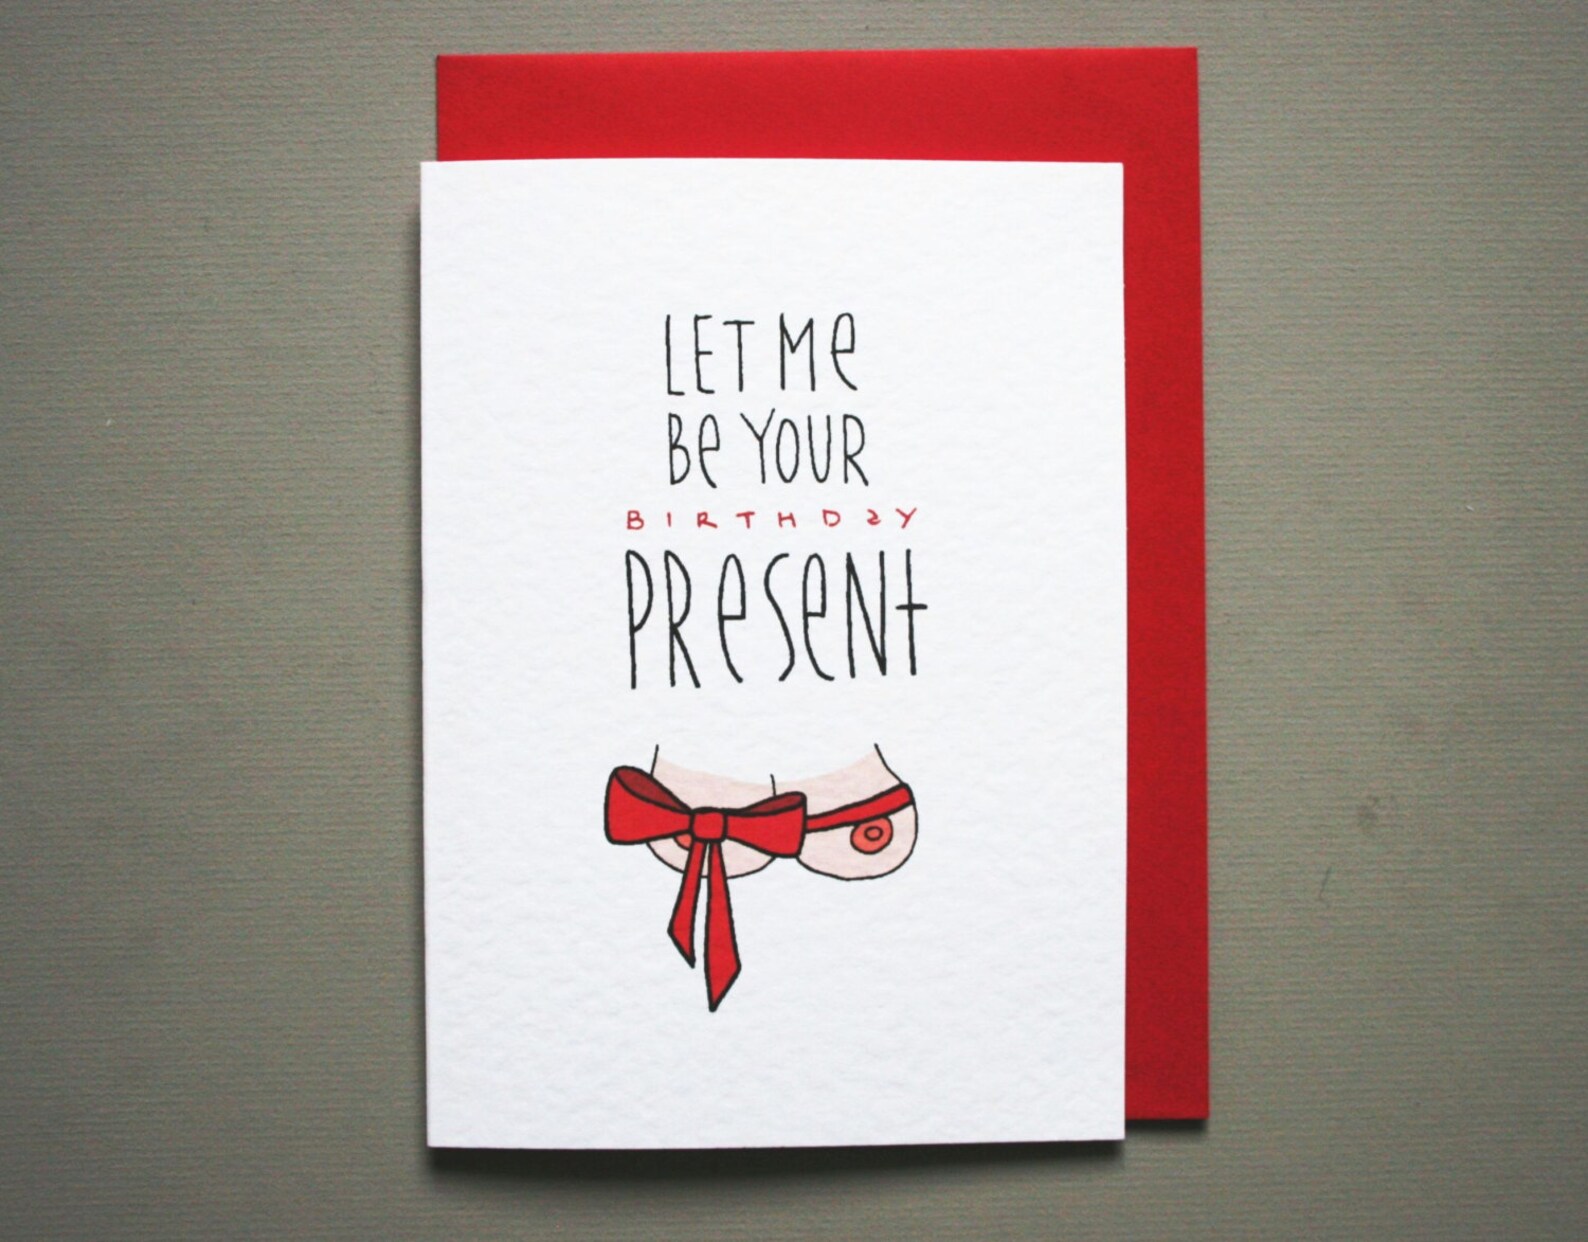 How to Find the Perfect Birthday Card for Your Boyfriend This Year